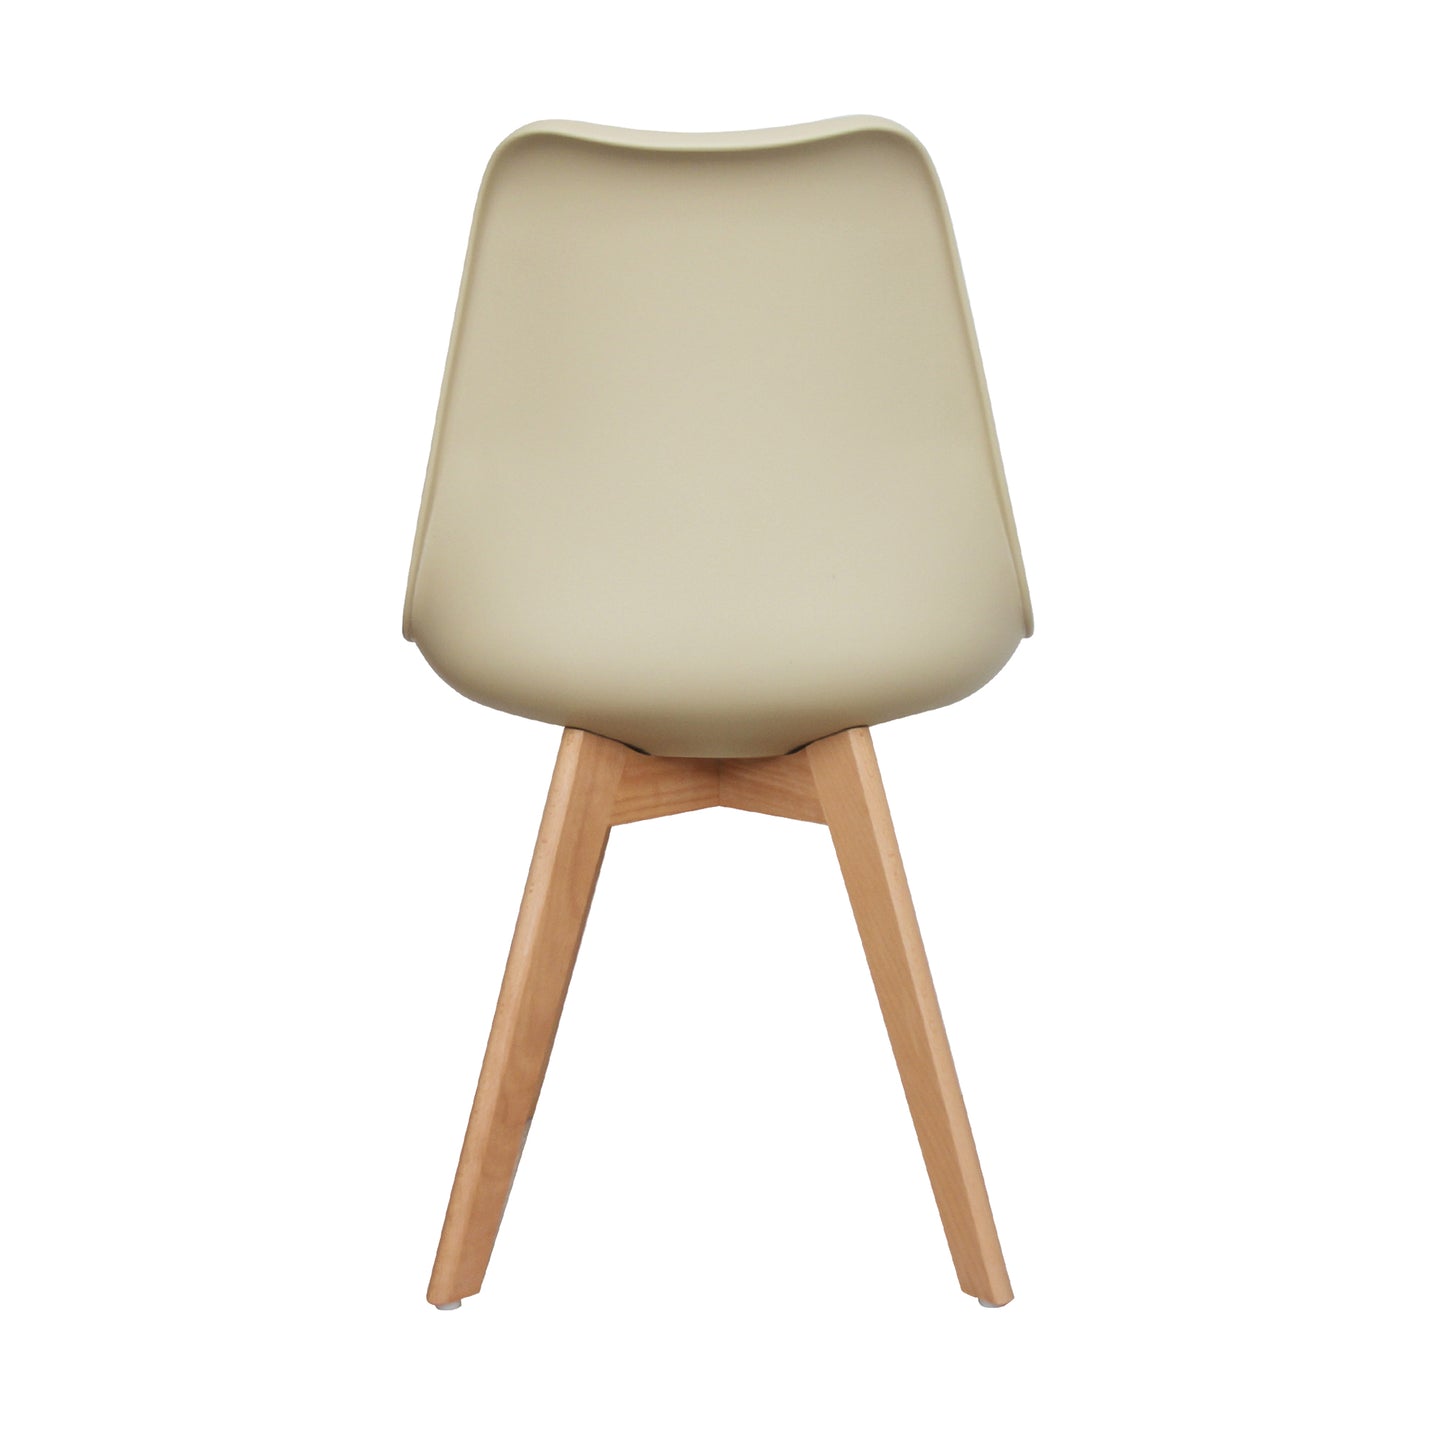 CHOTTO - Ando Dining Chairs - Beige x 2